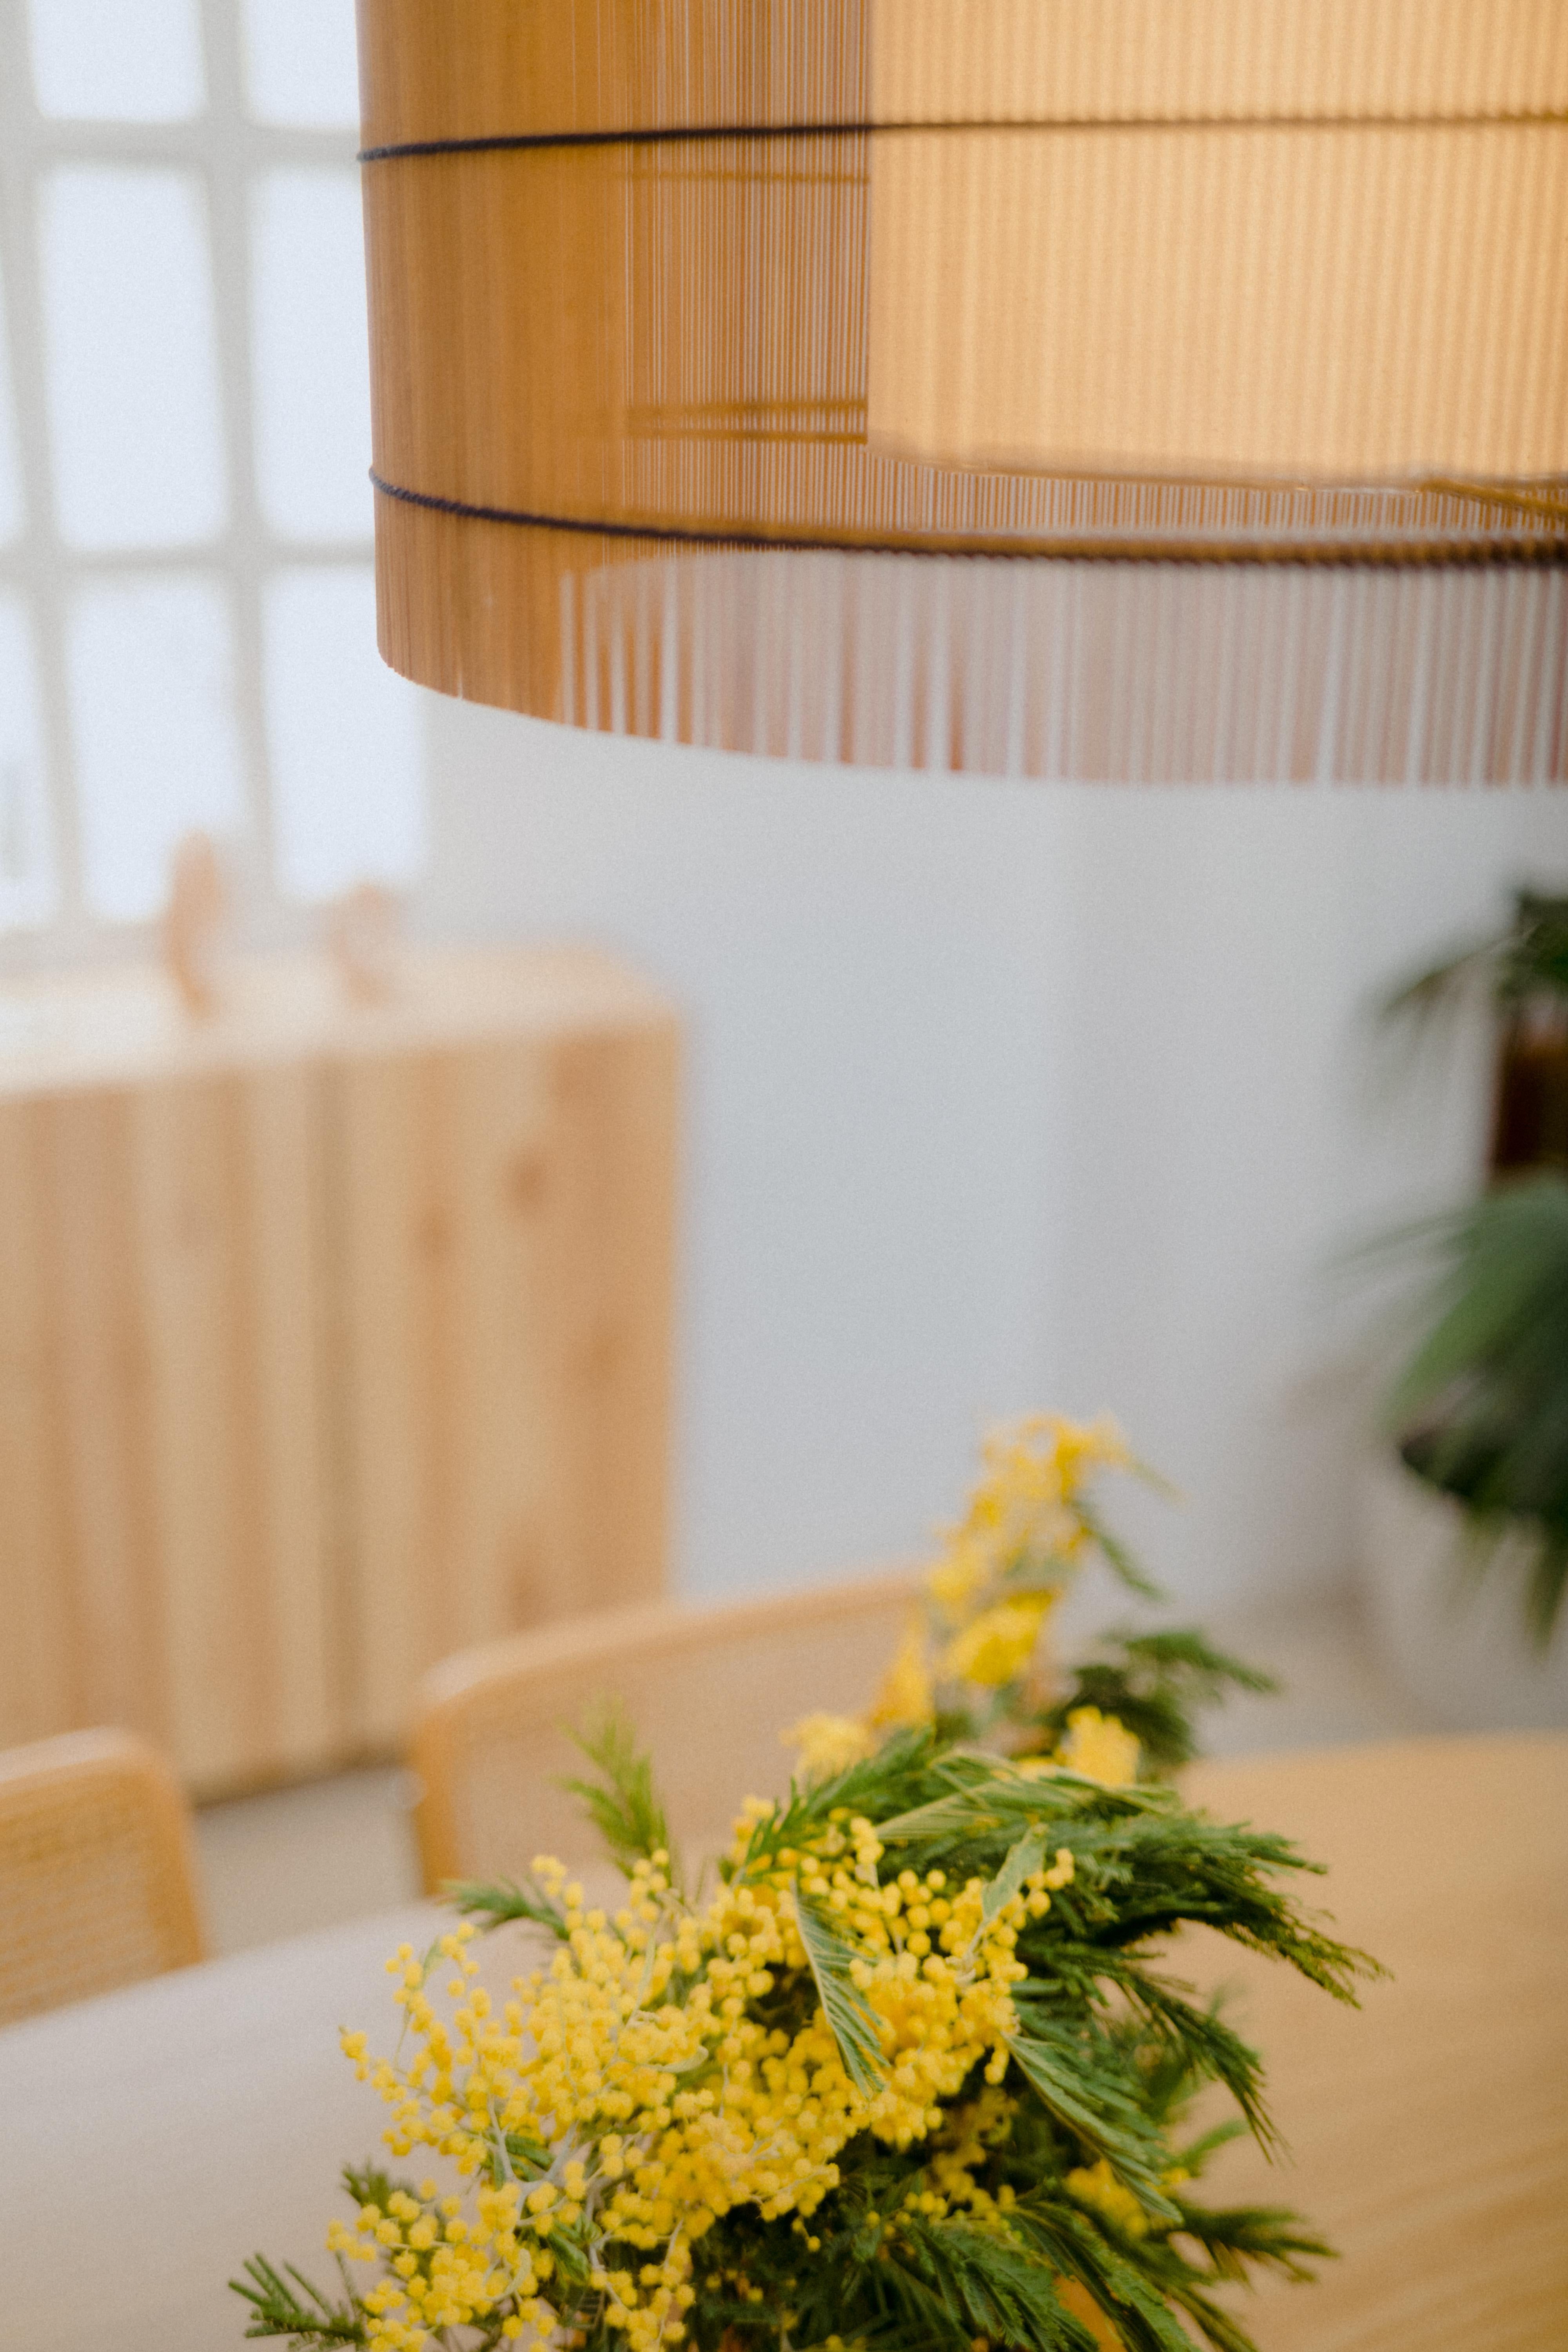 Spanish Contemporary, Handmade, Pendant Lamp, Bamboo Cherry, by Mediterranean Objects For Sale